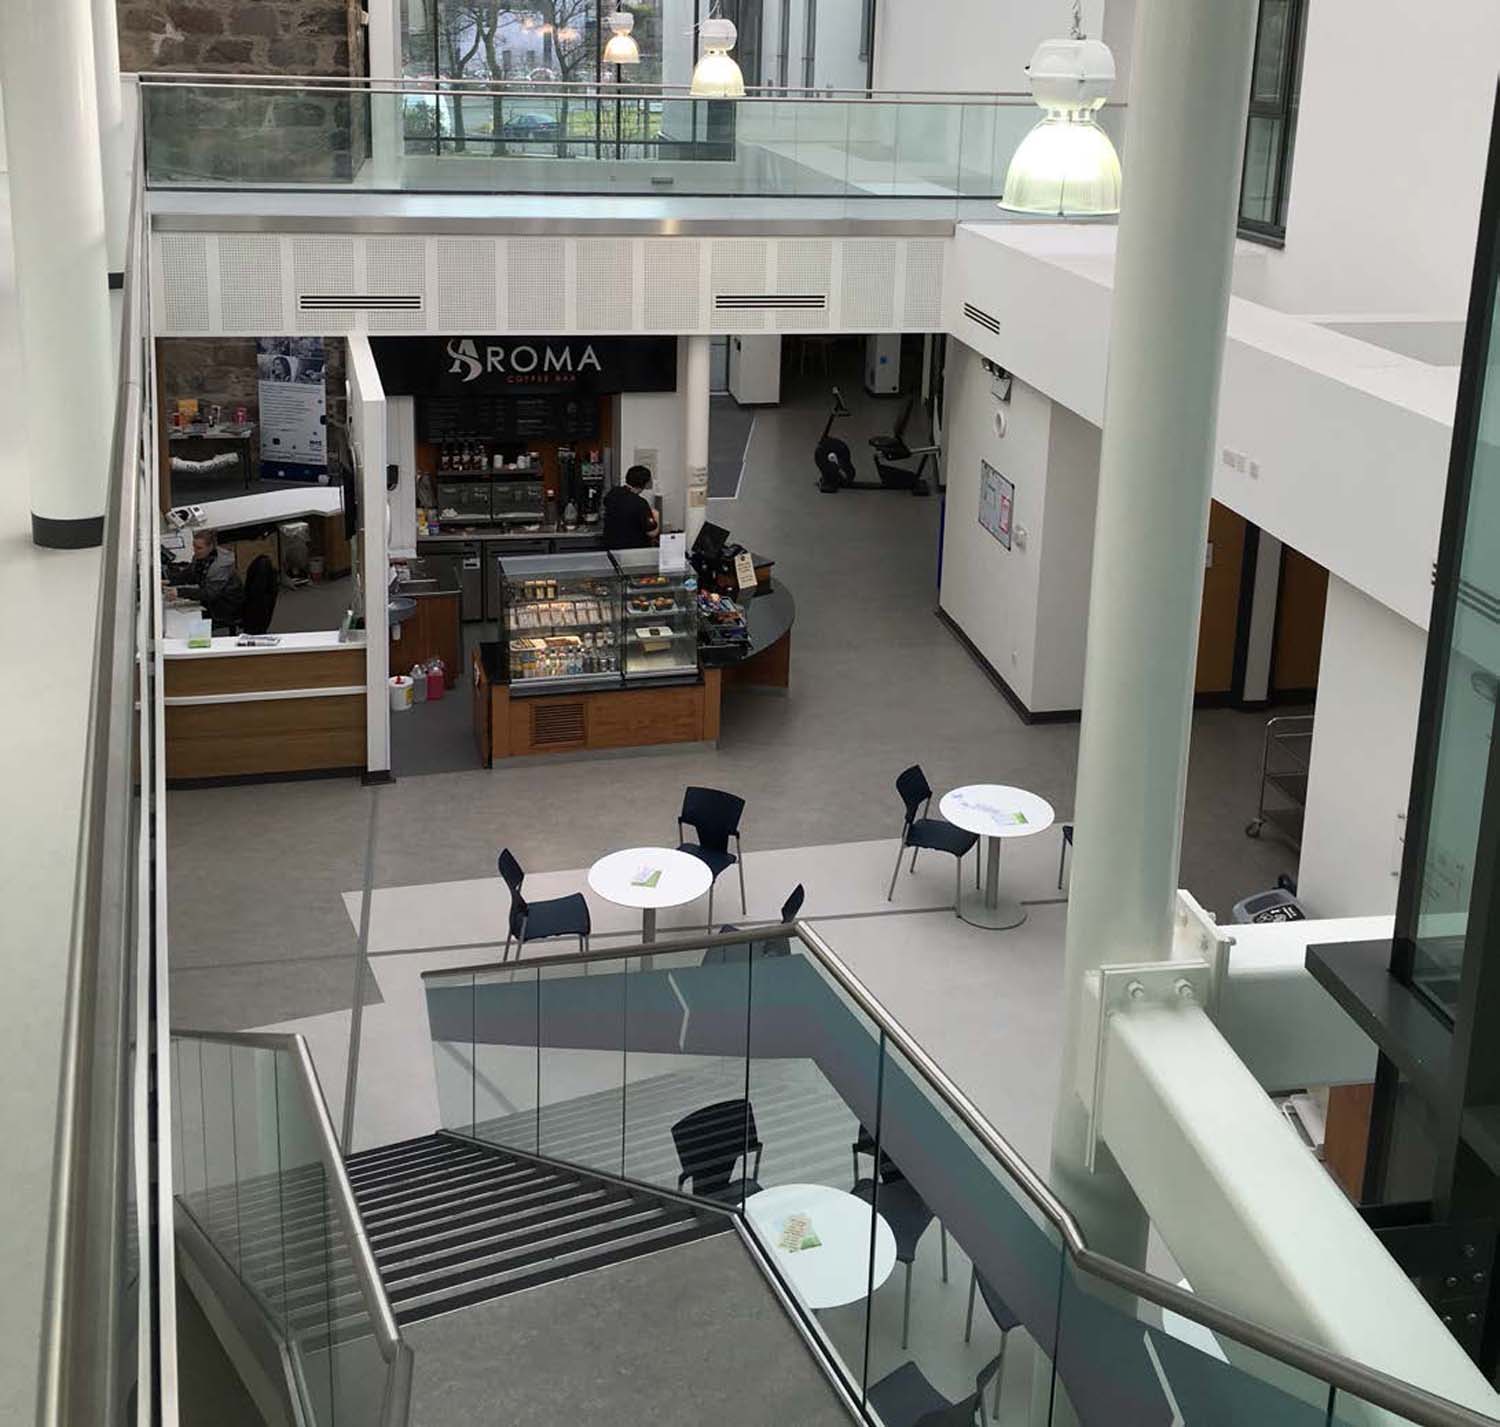 Looking down at Aberdeen Community Health and Care Village cafe and reception area in the atrium from the first floor.